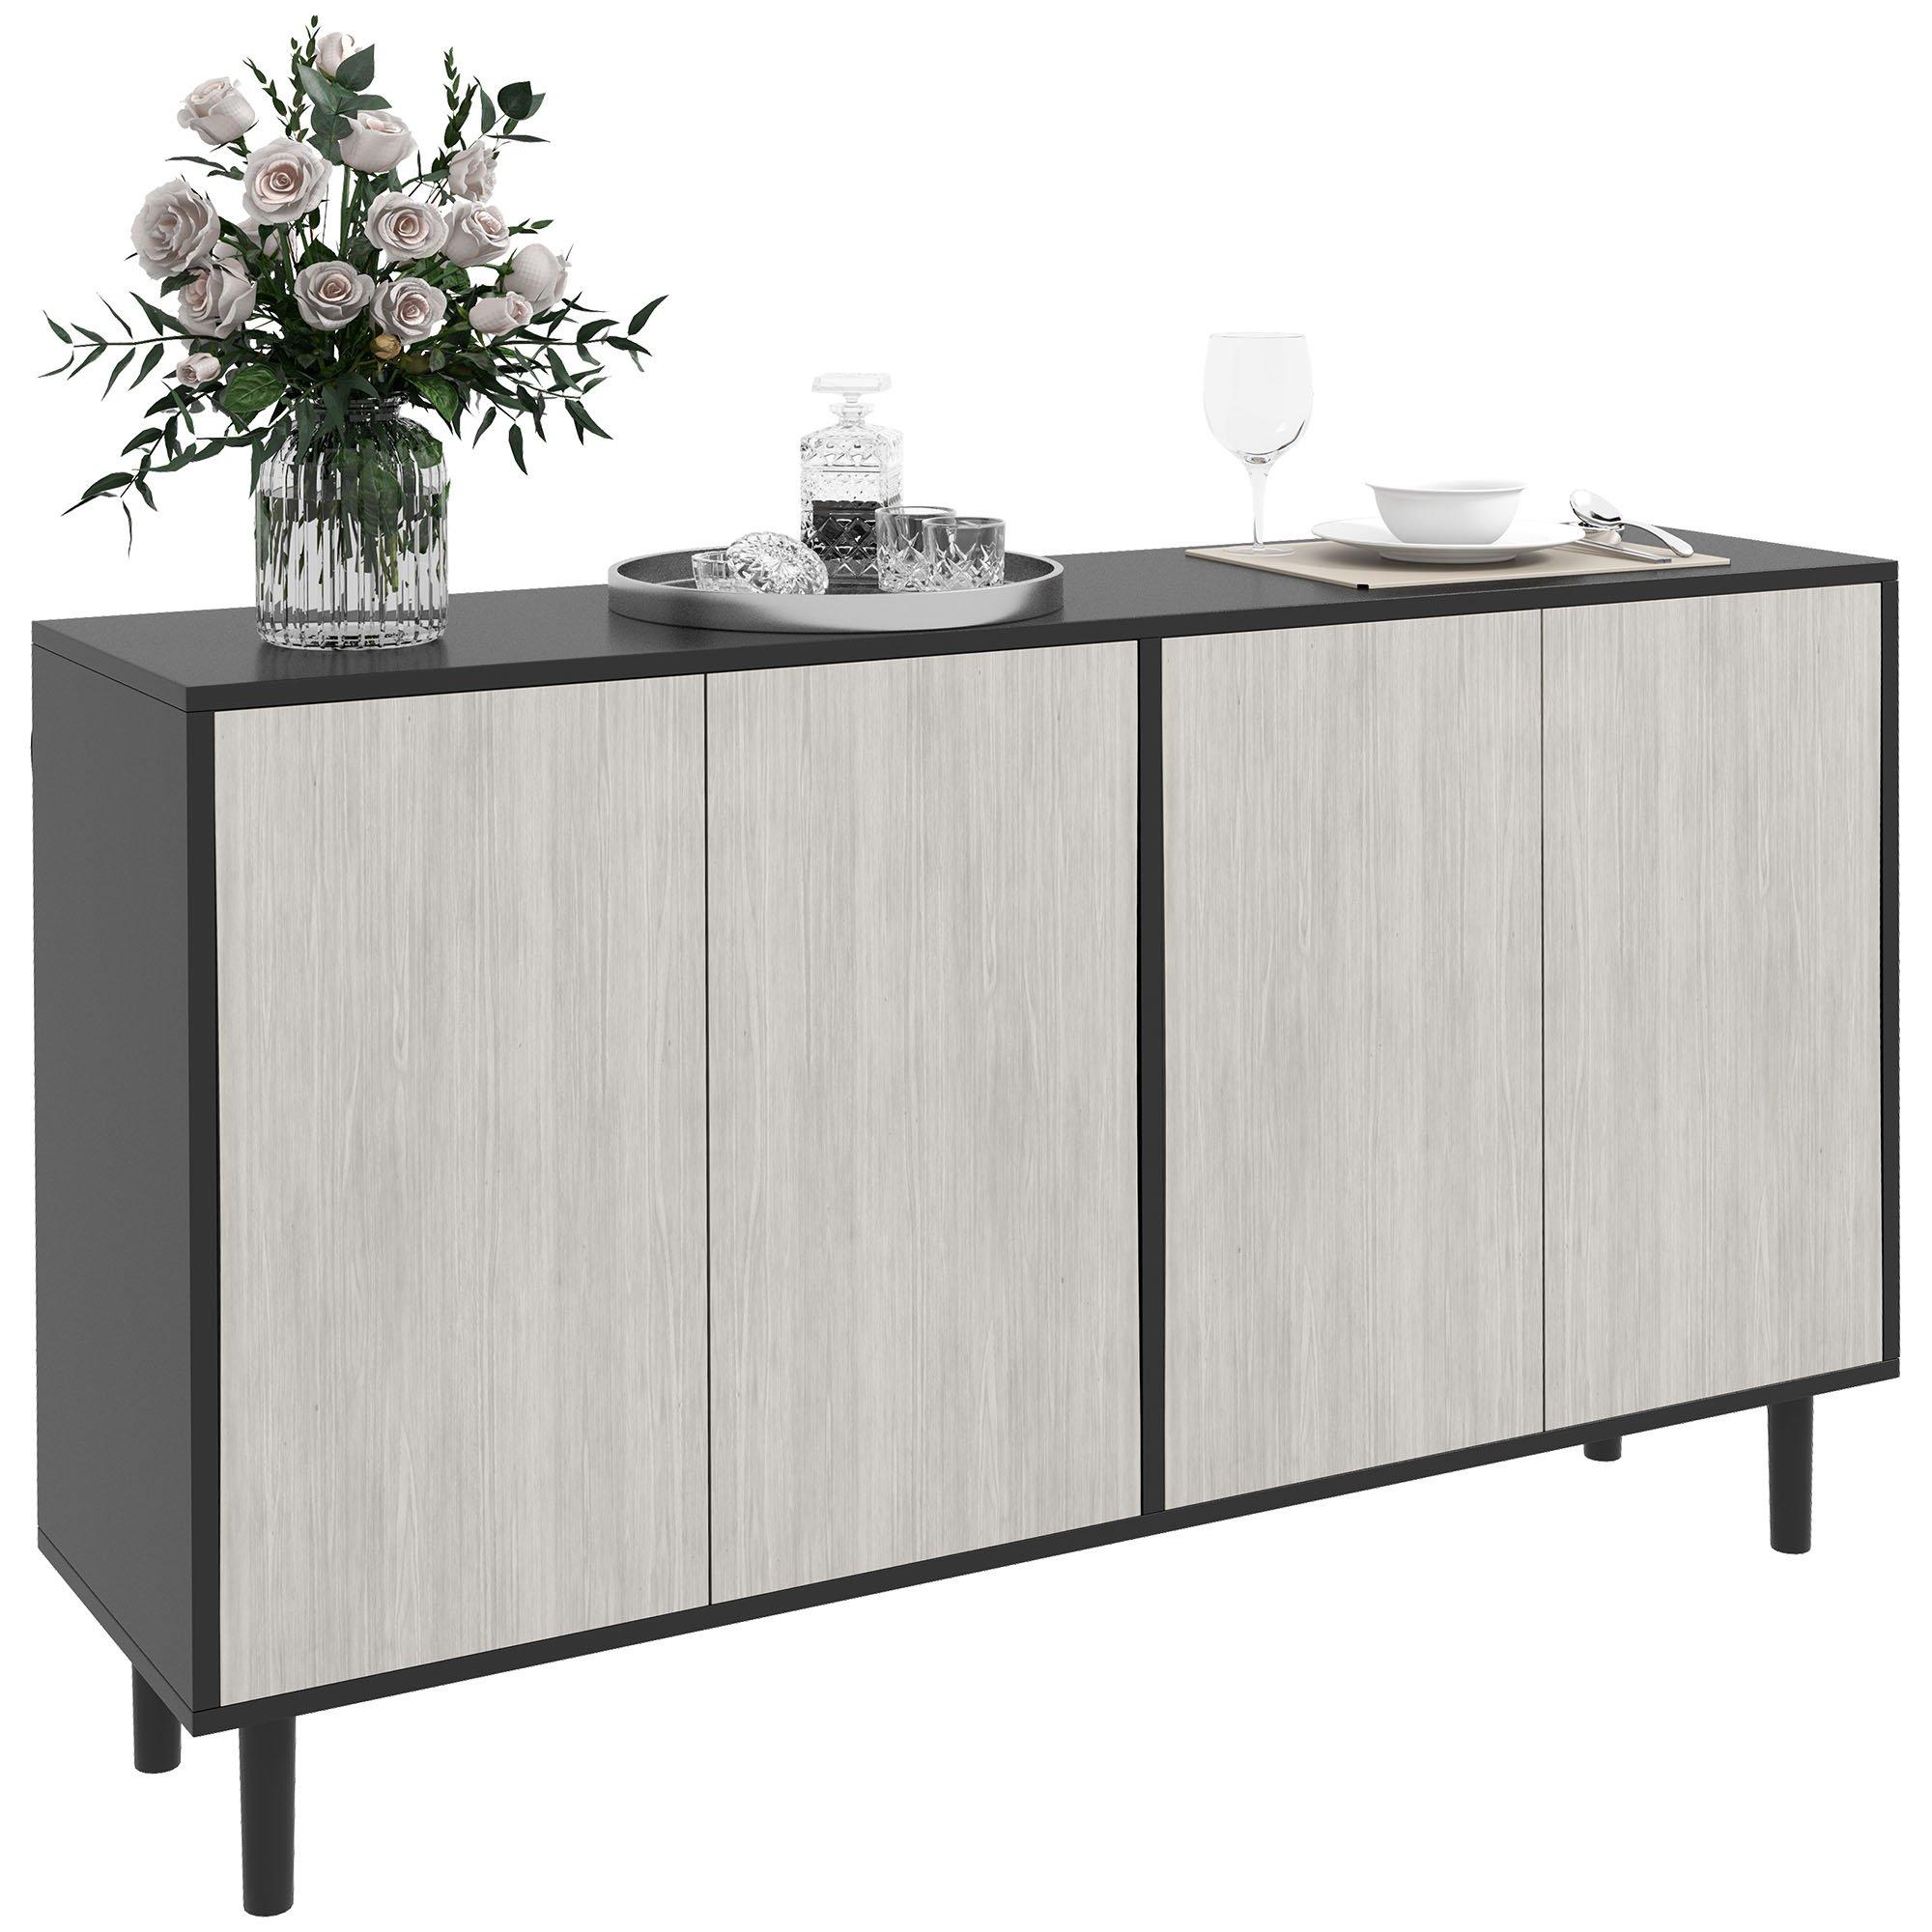 Sideboard Kitchen Storage Cabinet with 2 Cupboards Solid Wood Legs